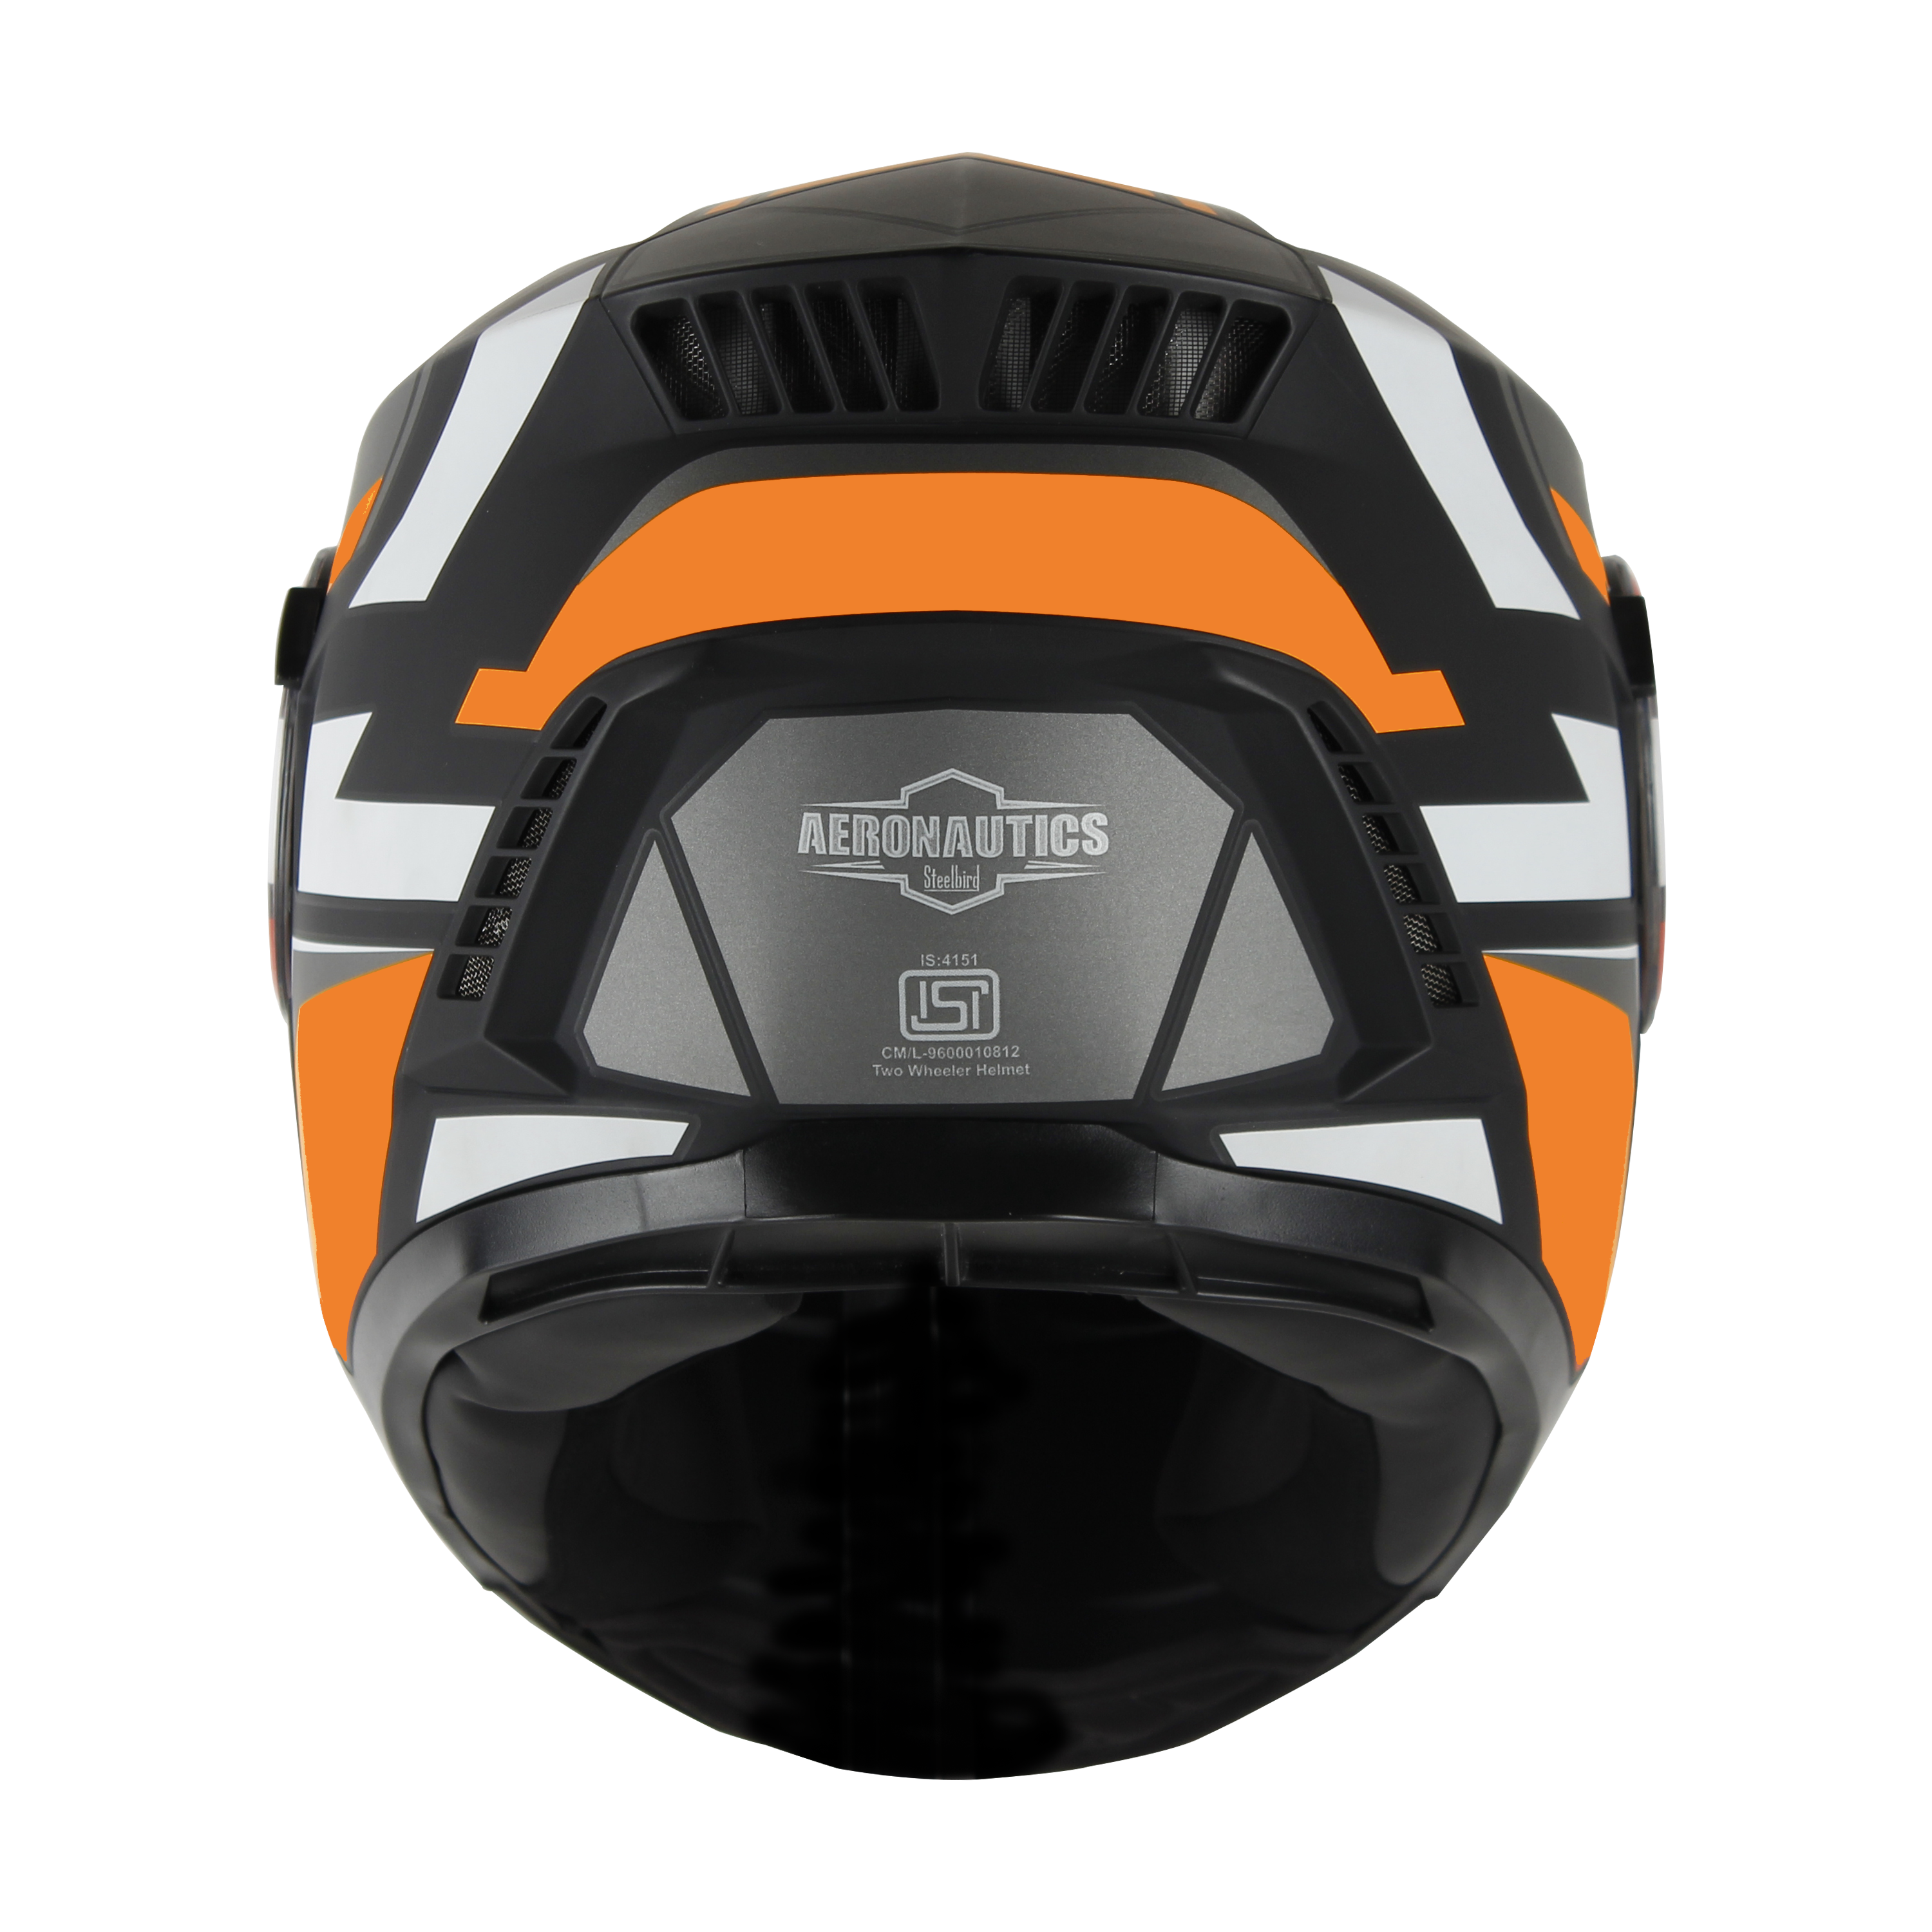 SBH-40 SPEED GLOSSY BLACK WITH ORANGE (INNER SUN SHIED AND HIGH-END INTERIOR)